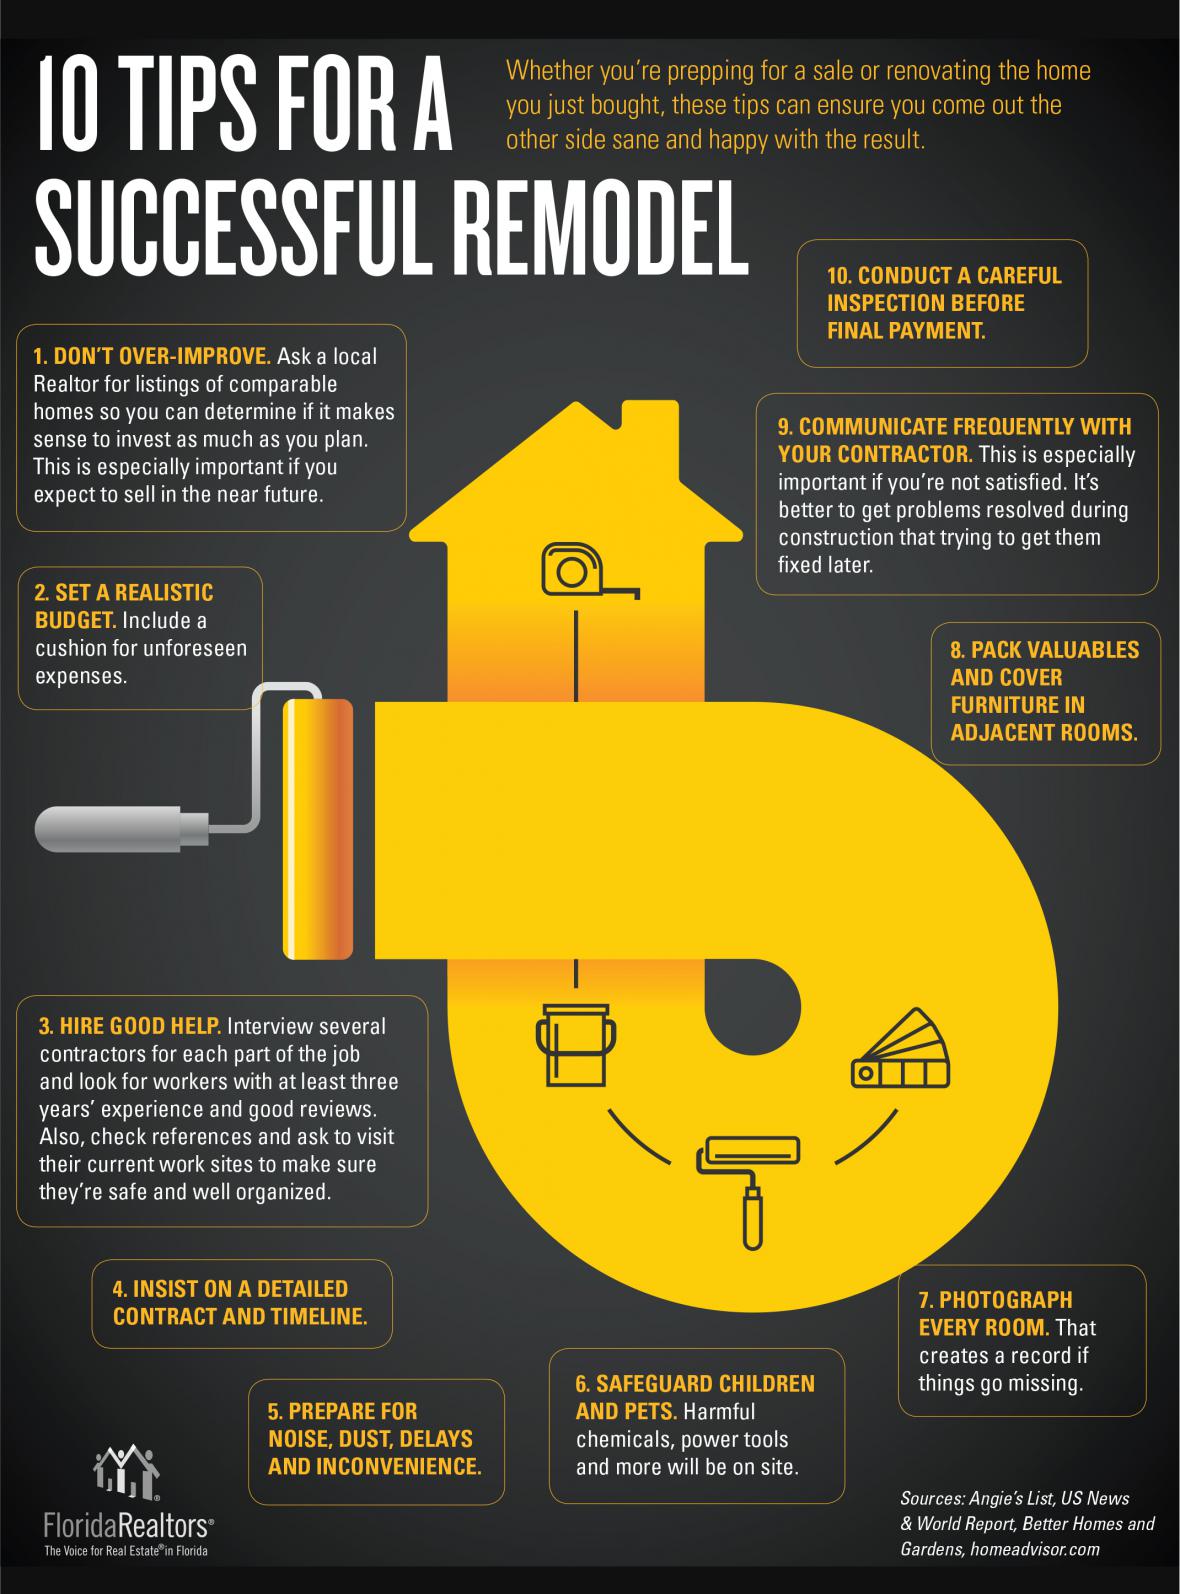 10 TIPS FOR A SUCCESSFUL REMODEL